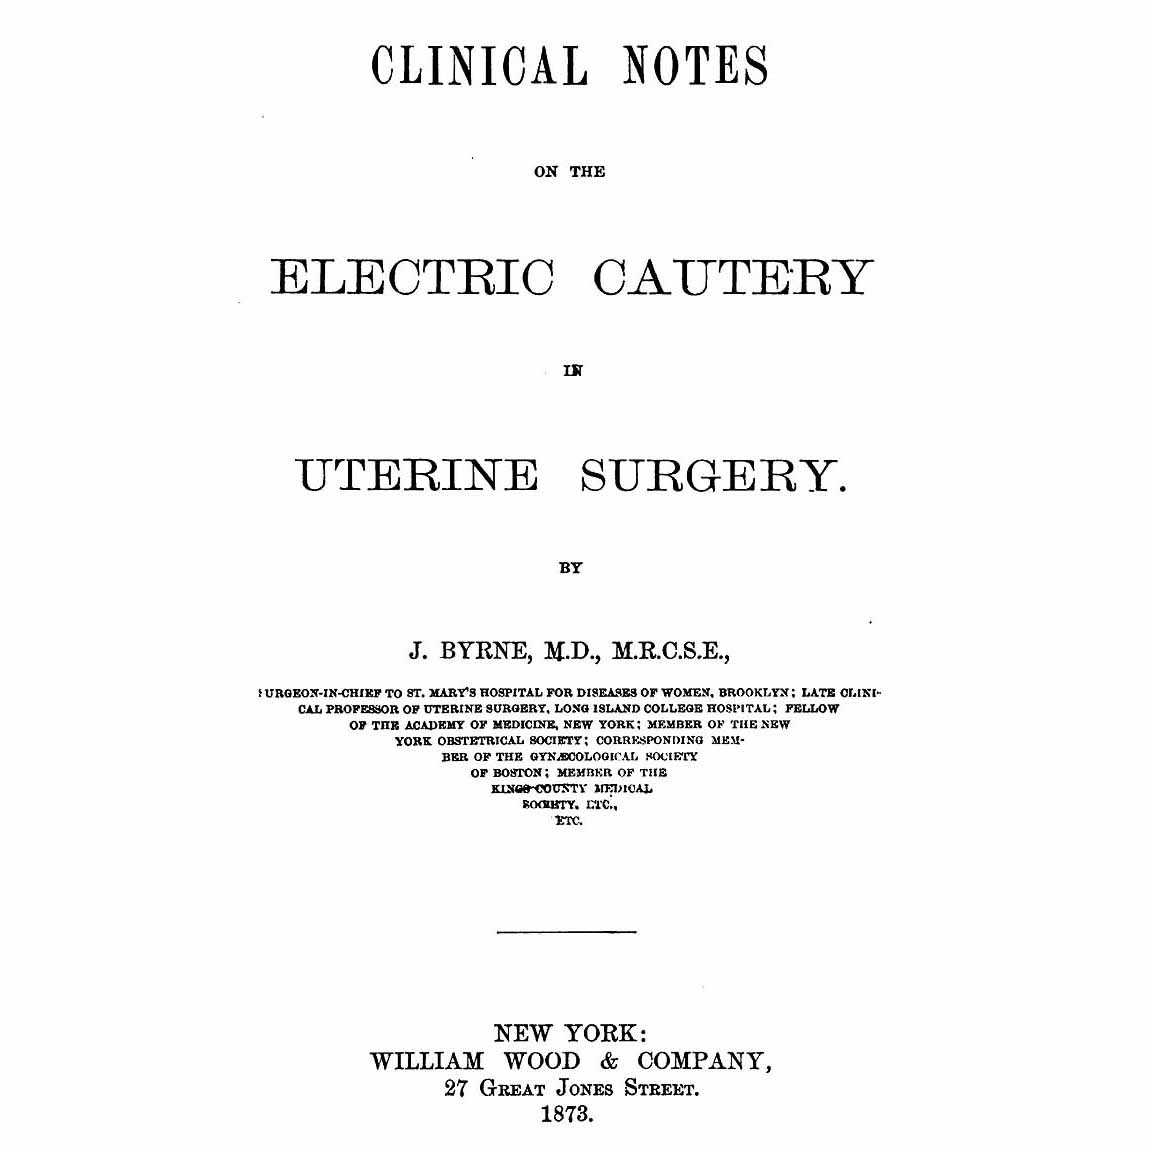 1873-BYRNE-Clinical-Notes-Electric-Cautery